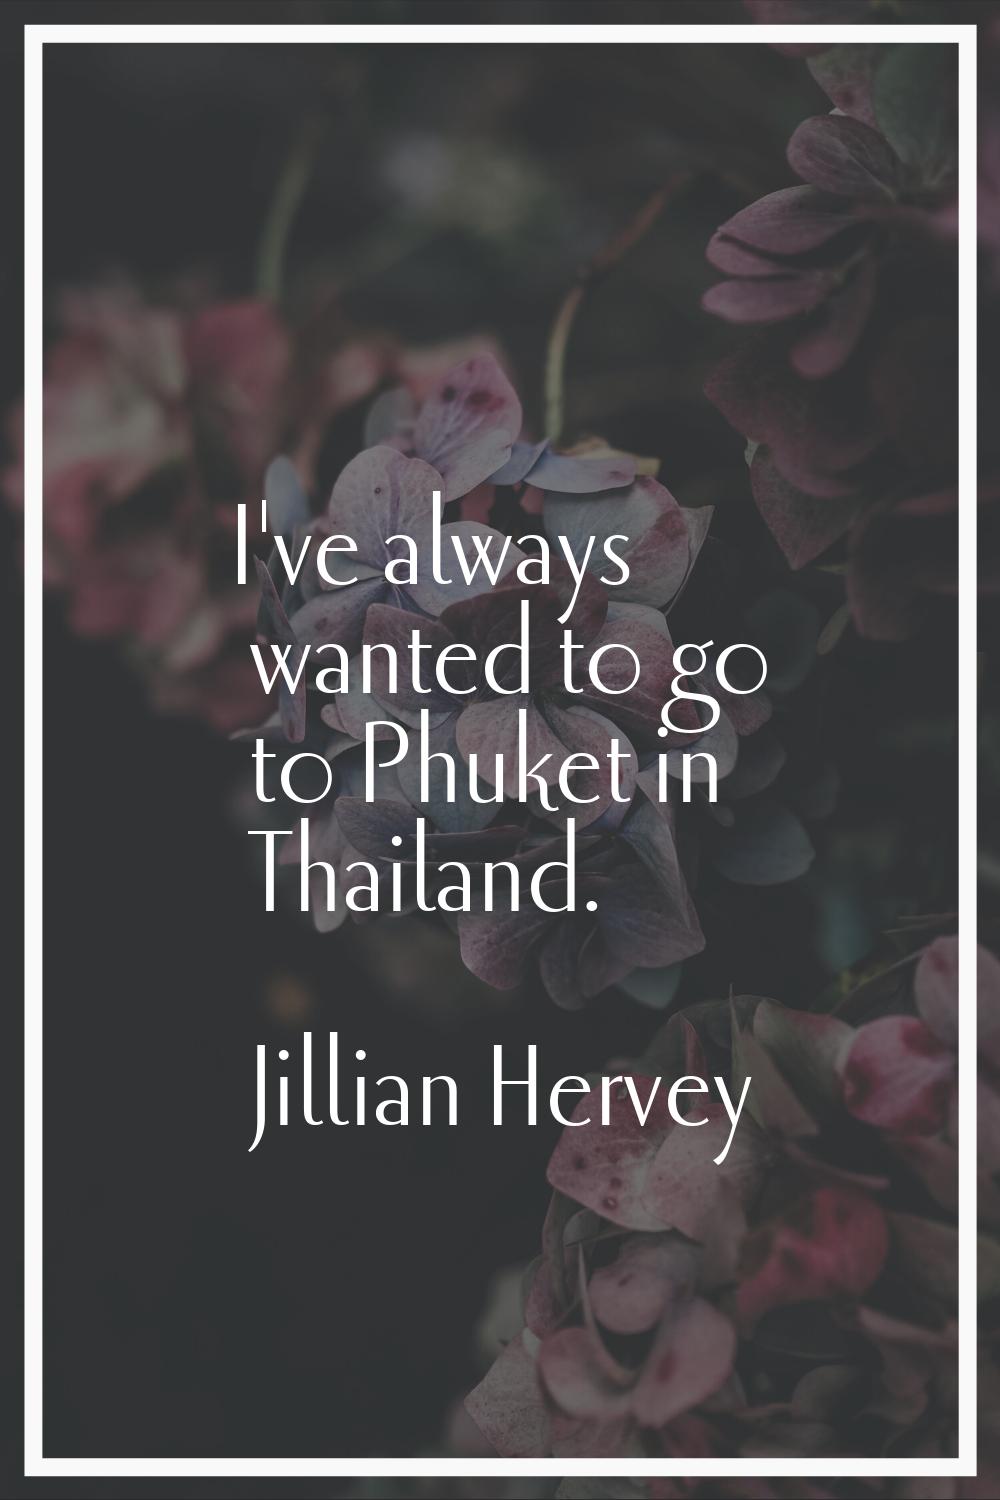 I've always wanted to go to Phuket in Thailand.